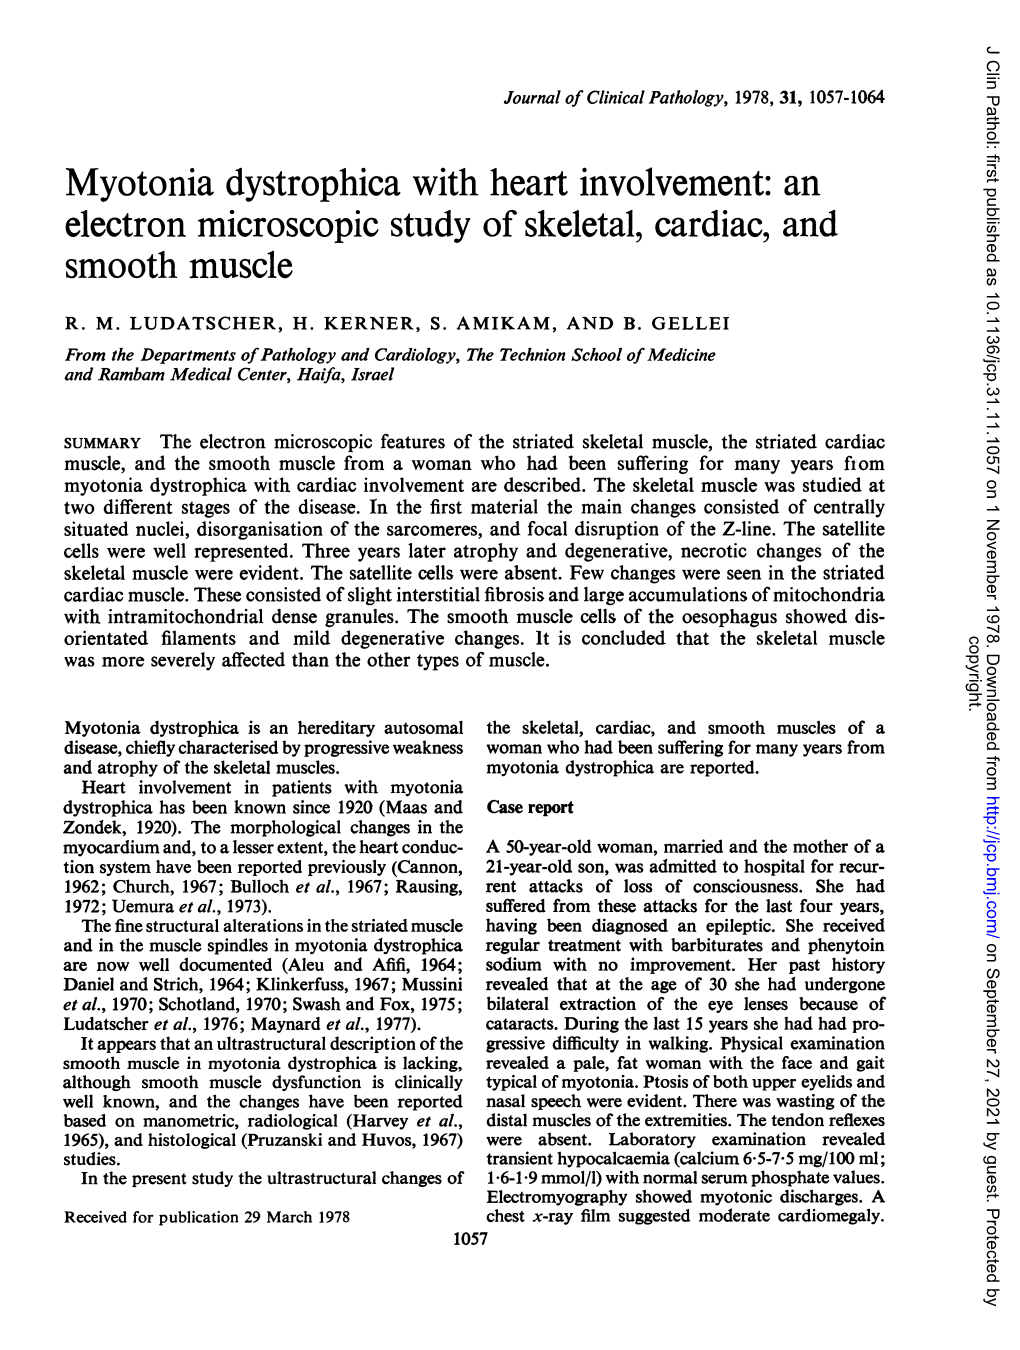 Myotonia Dystrophica with Heart Involvement: an Electron Microscopic Study of Skeletal, Cardiac, and Smooth Muscle